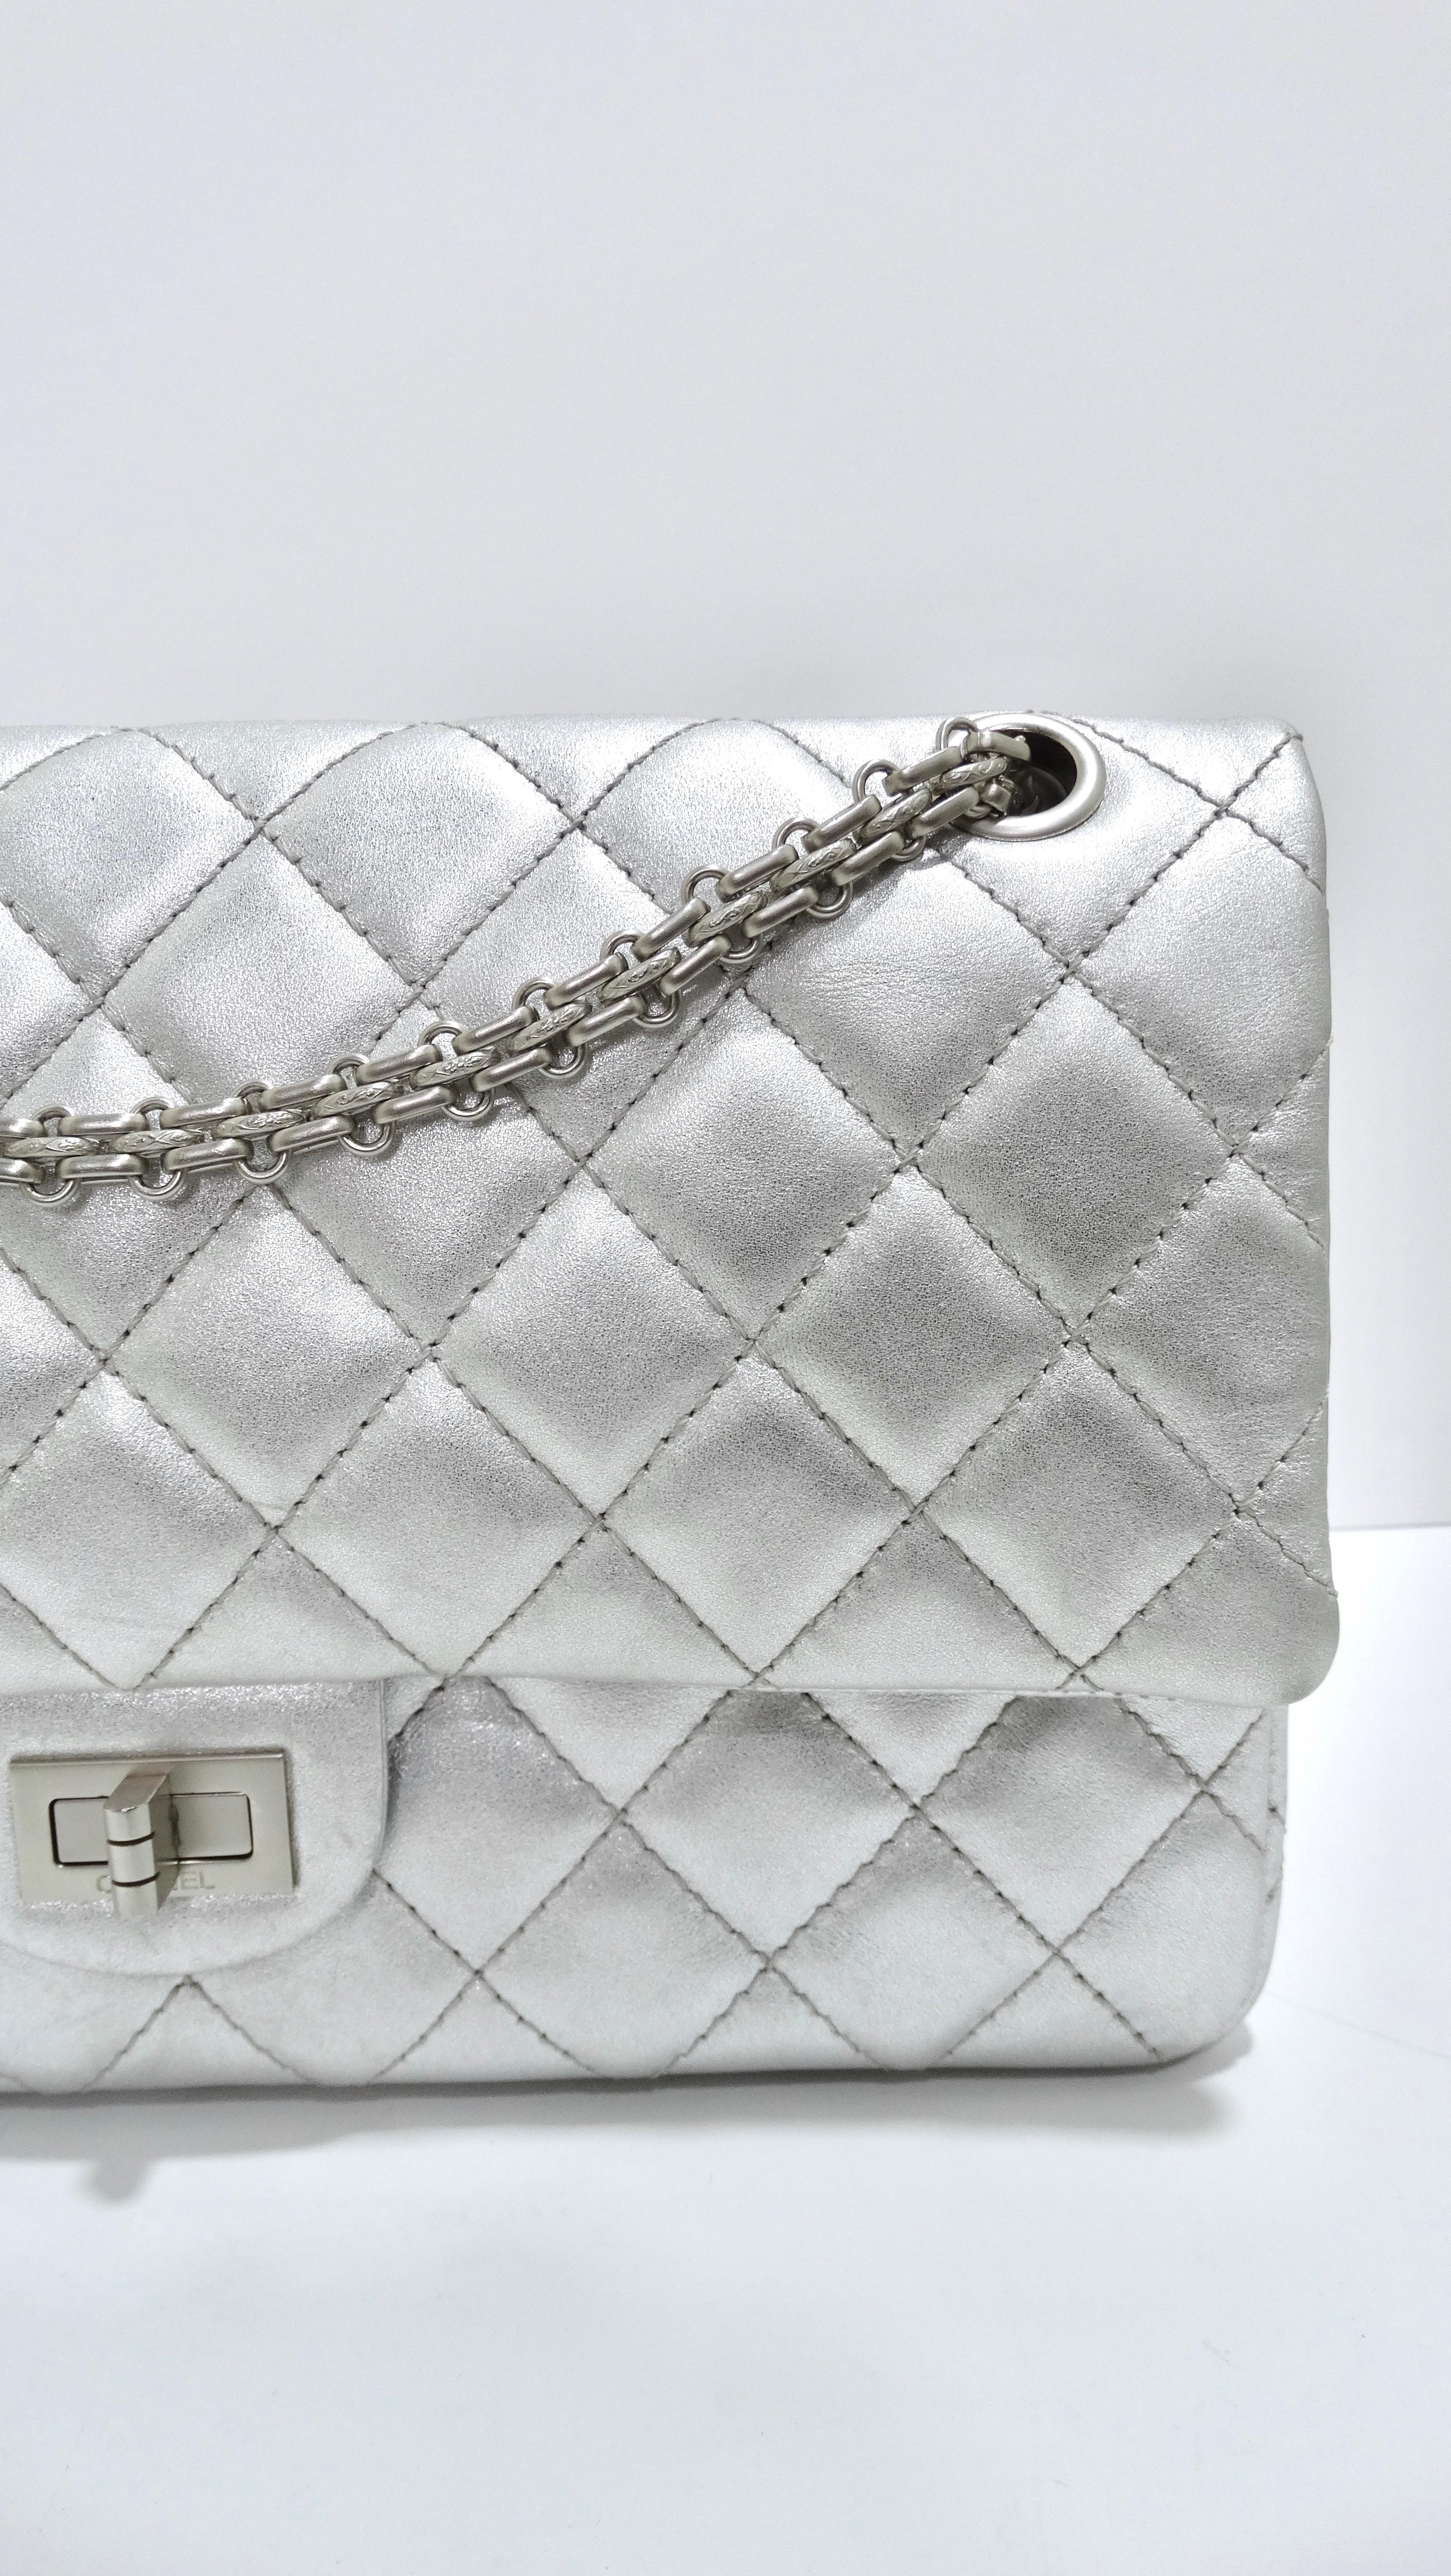 Chanel Metallic Calfskin Quilted 2.55 Reissue Jumbo Double Flap In Excellent Condition For Sale In Scottsdale, AZ